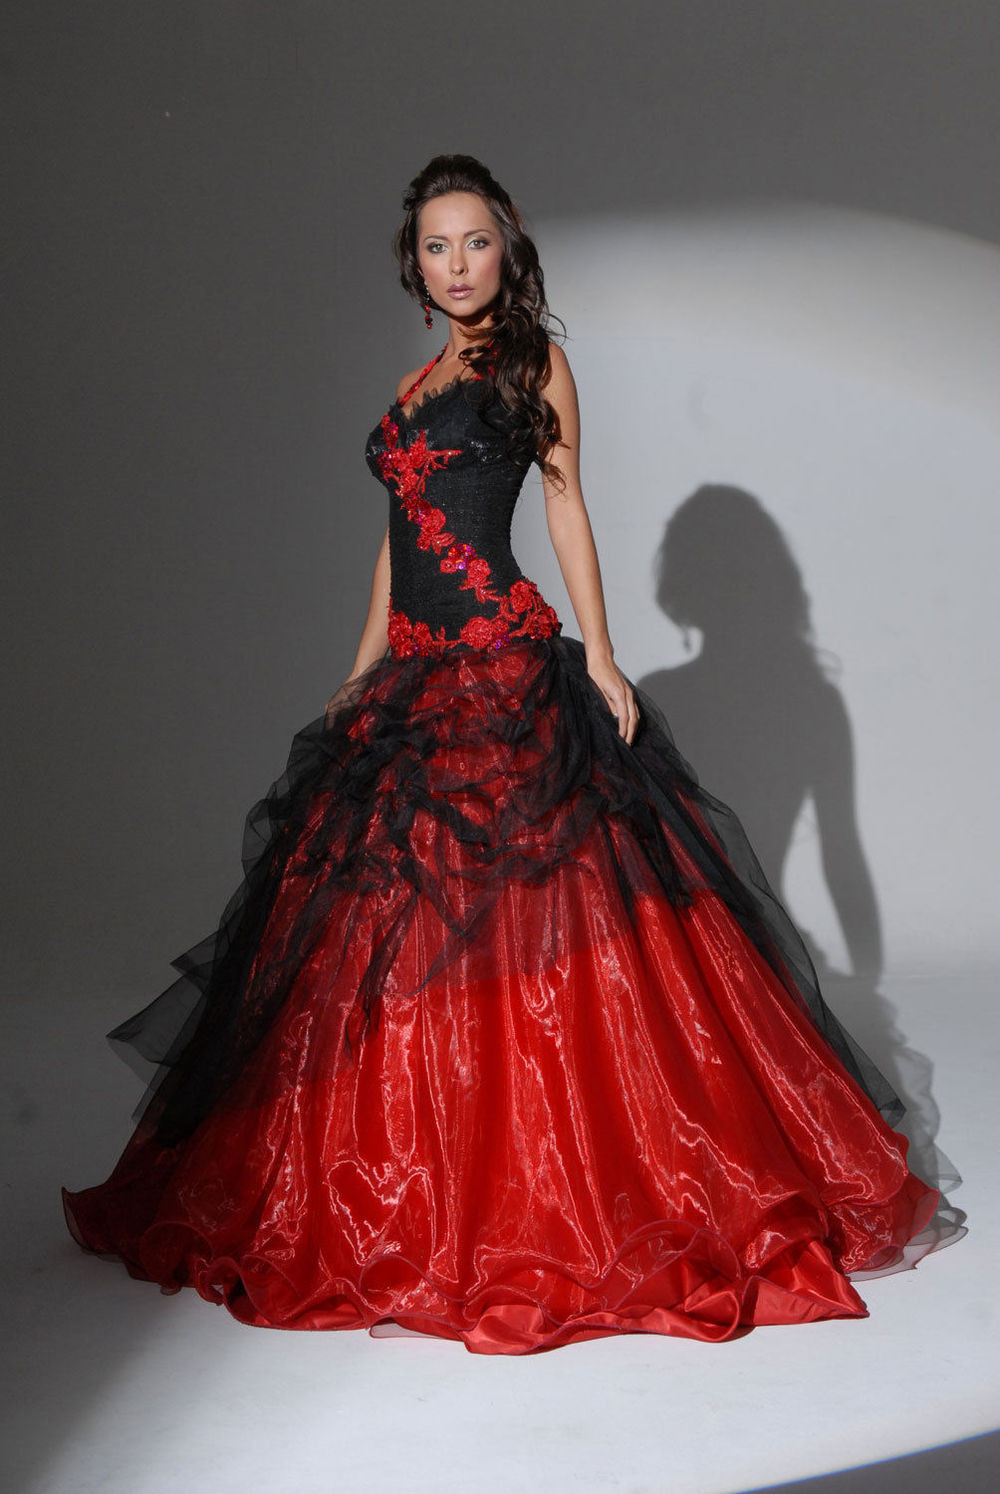 Red Wedding Dresses
 Why You Can Totally Rock Red on Your Big Day